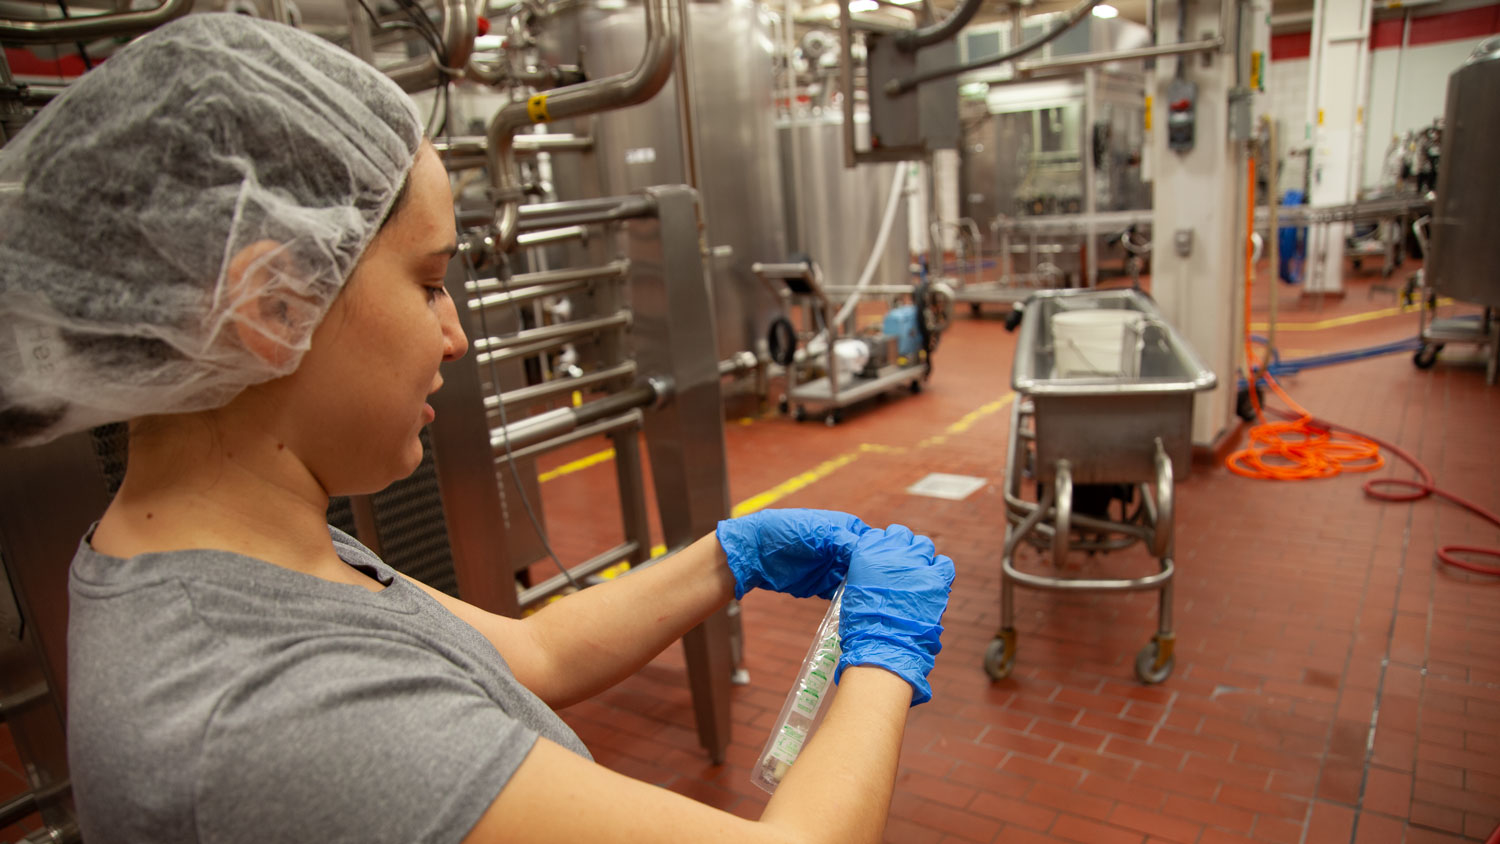 A woman begins the process of taking a pathogen sample at a dairy processing facility